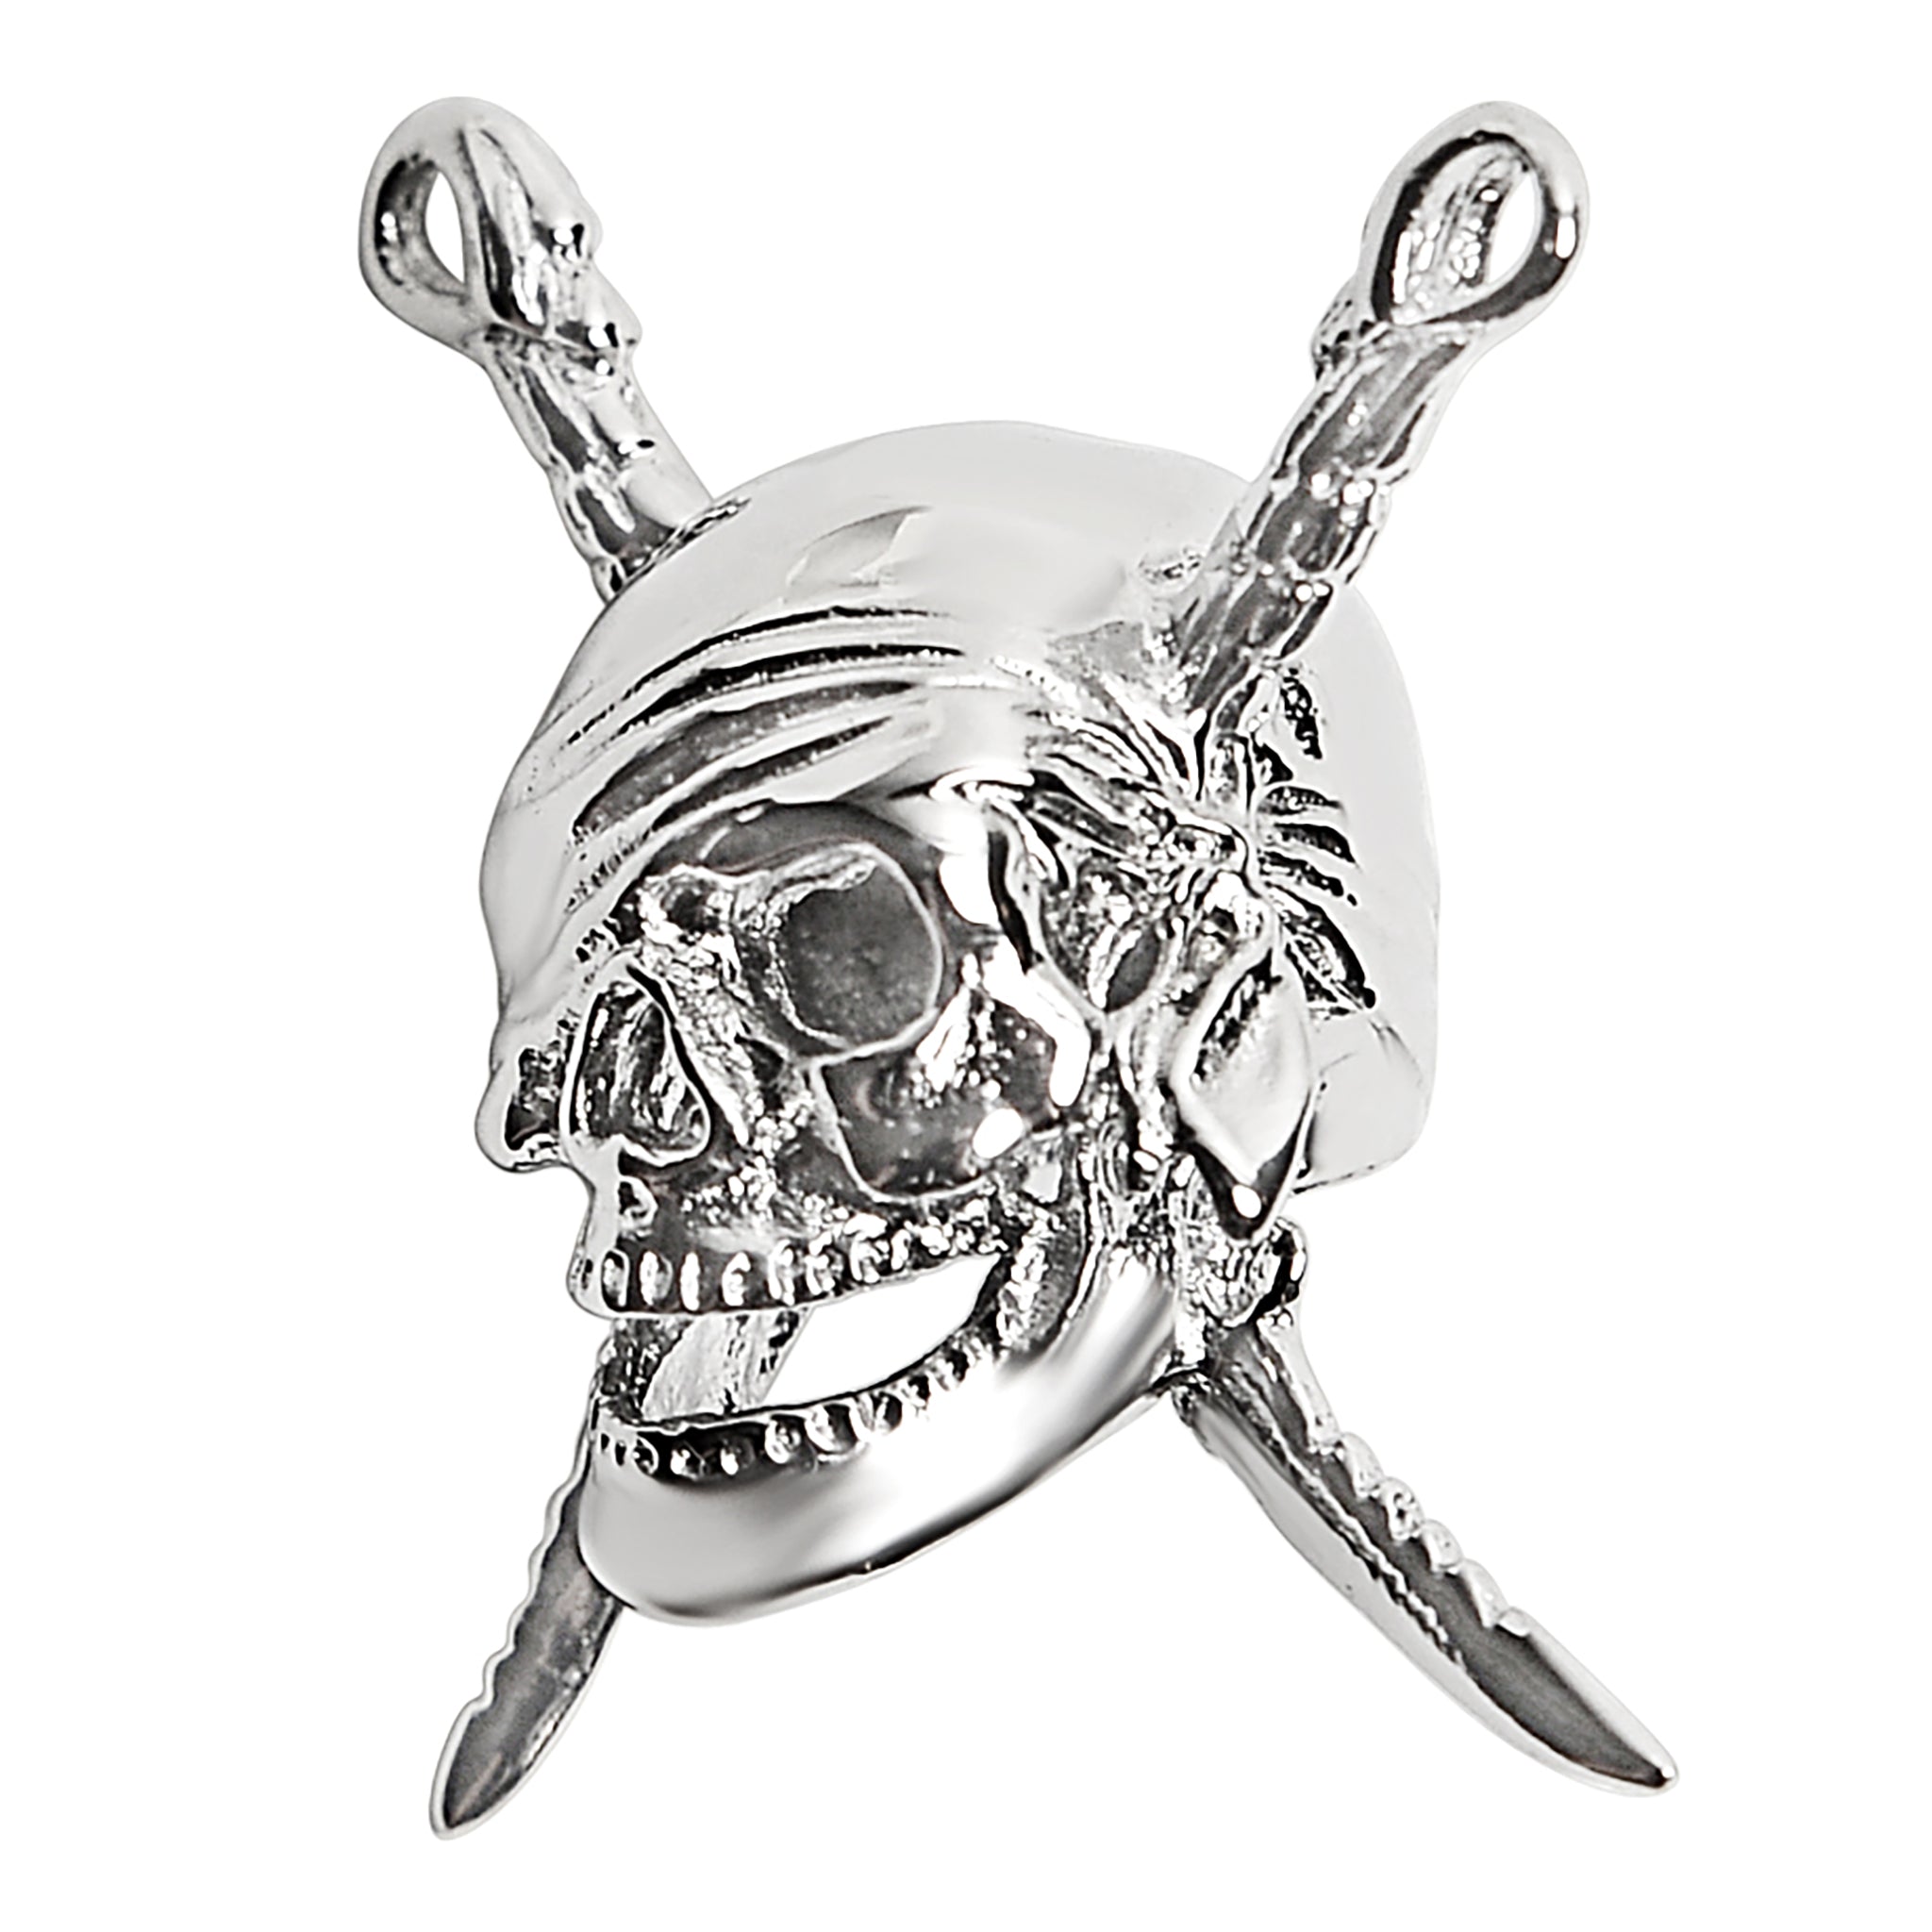 Stainless Steel Pirate SKULL and Crossbones Pendant / NCZ0081